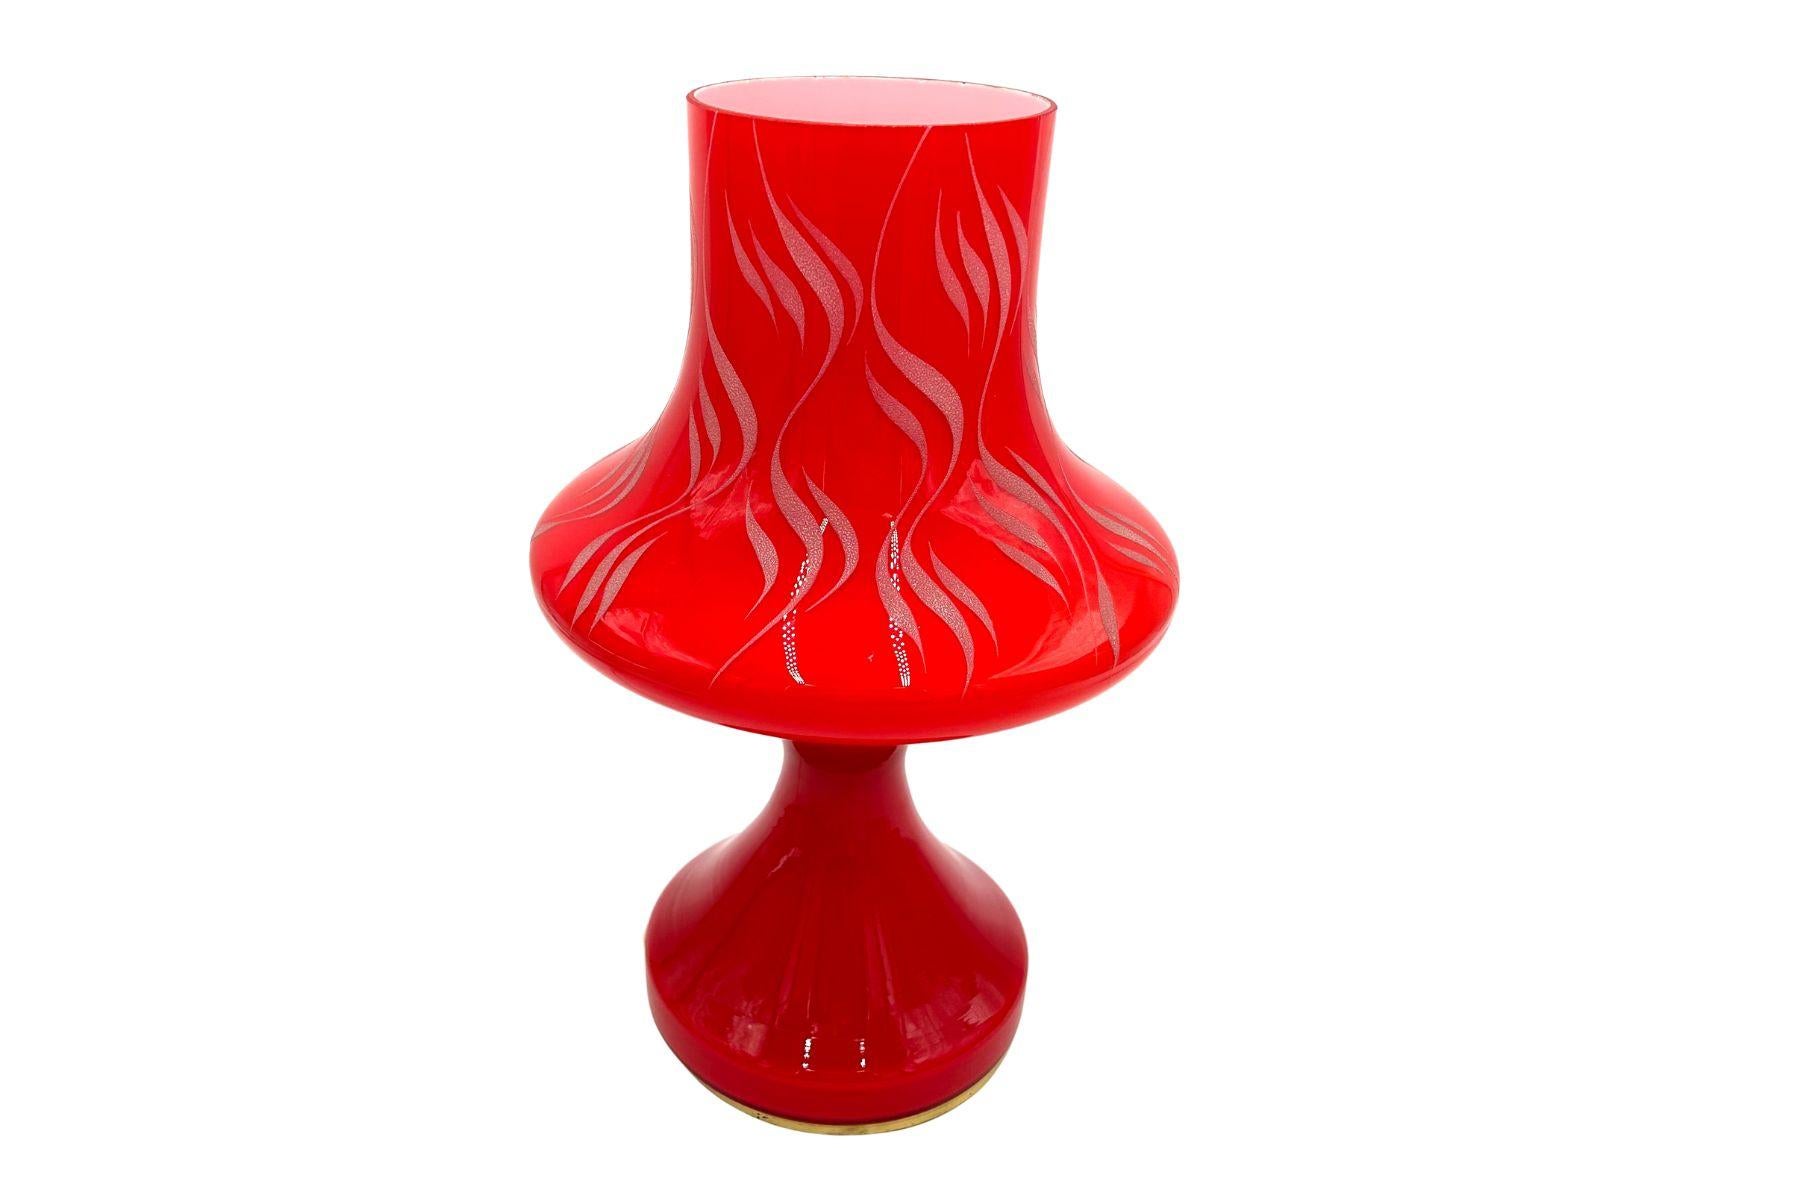 Red glass table lamp designed by Stephan Tabera, manufactured by OPP Jihlava in Czechoslovakia around 1970. Very good condition without damage.

Efficient lamp, bulb E27 thread.

height: 42cm

diameter: 25cm